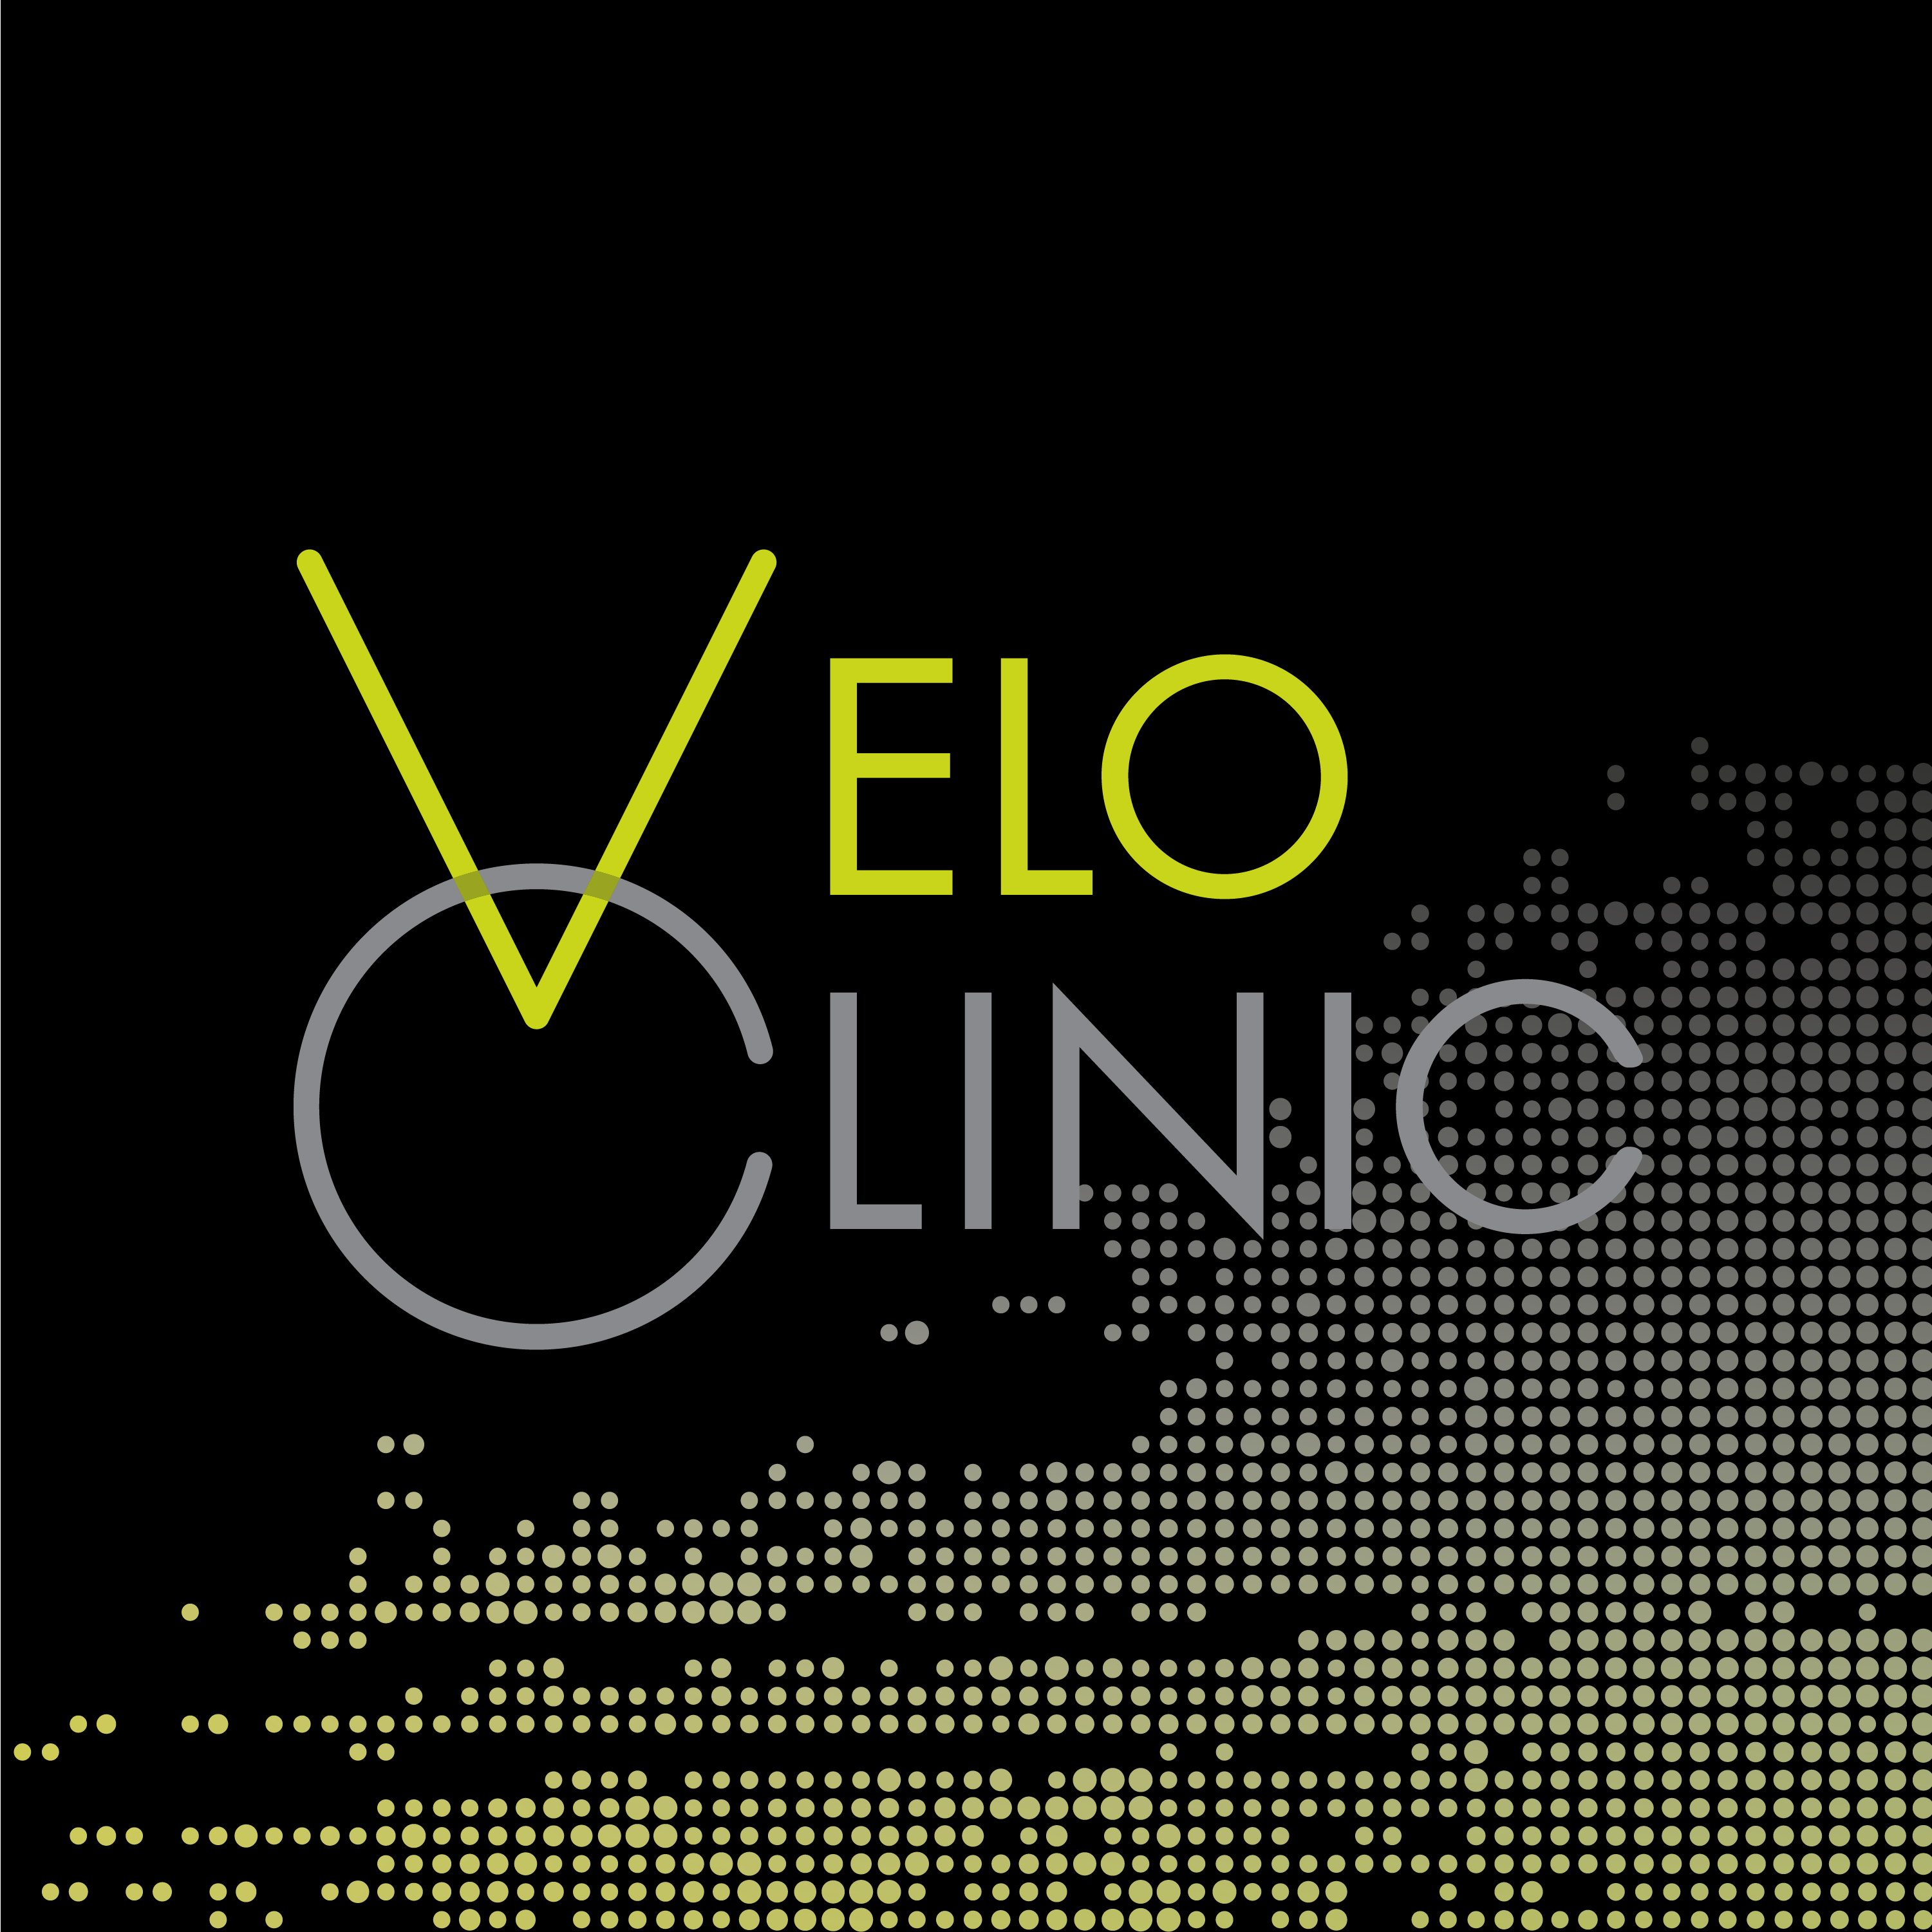 Club Image for VELO CLINIC